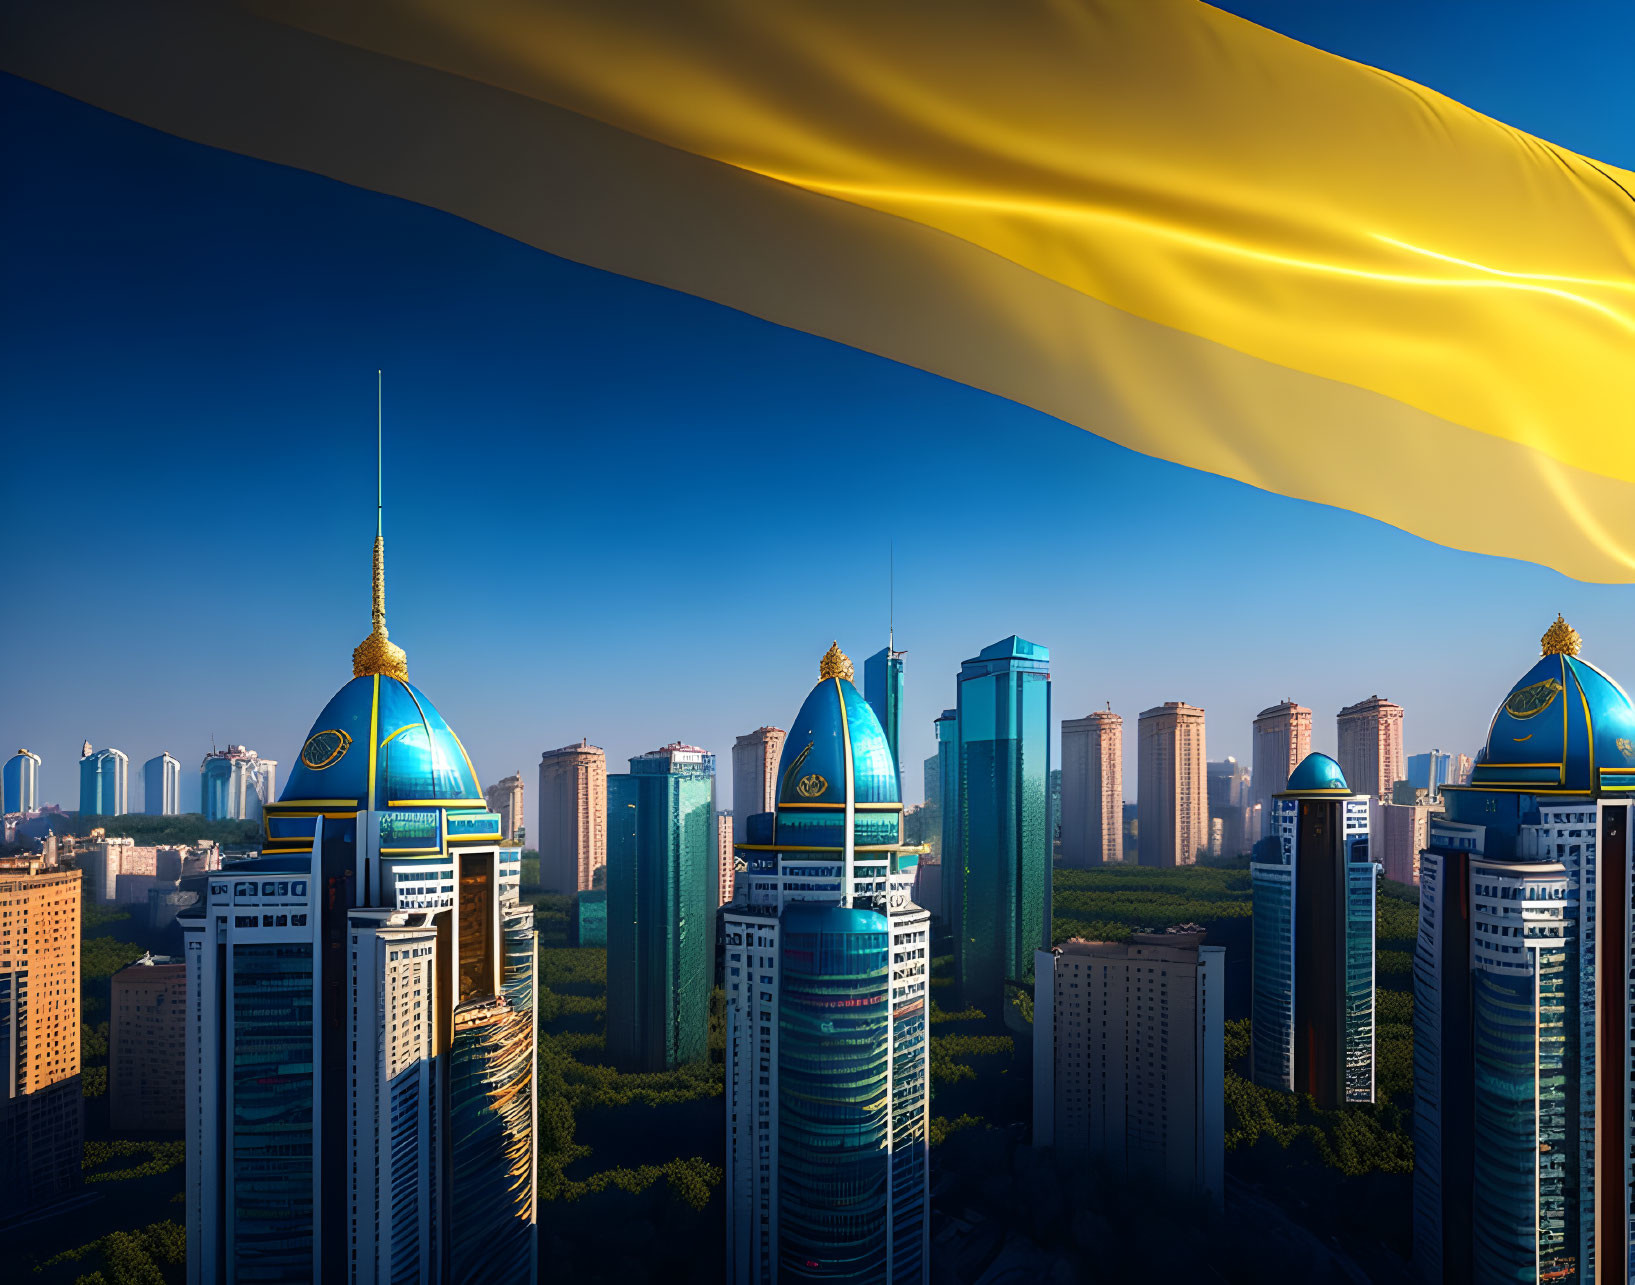 Modern cityscape with skyscrapers, domed rooftops, and yellow banner under clear blue sky